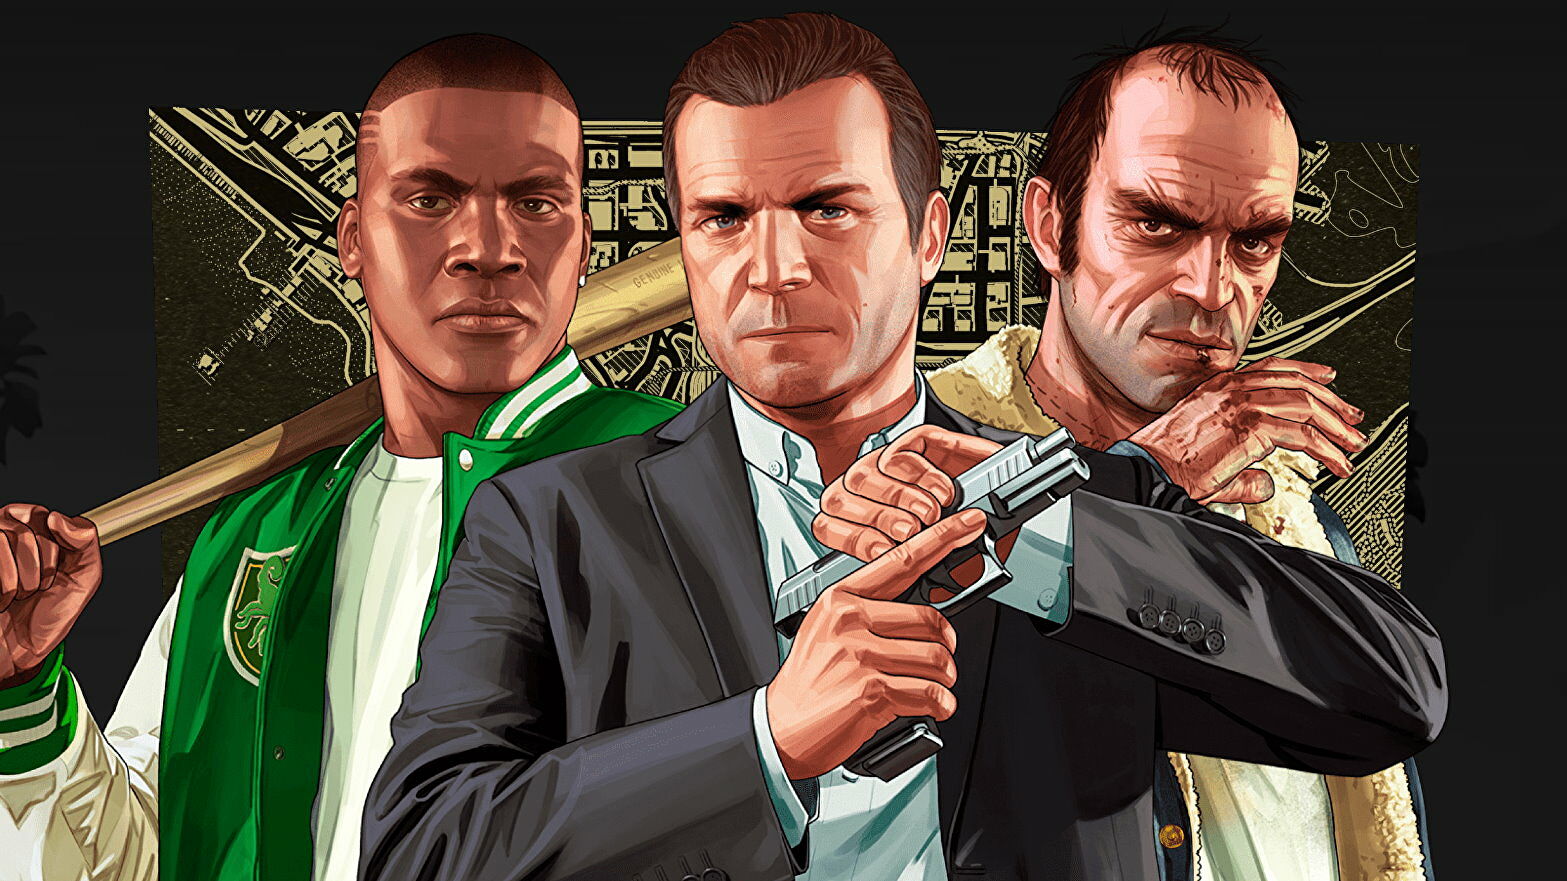 The GTA 6 leaks benefit precisely no one